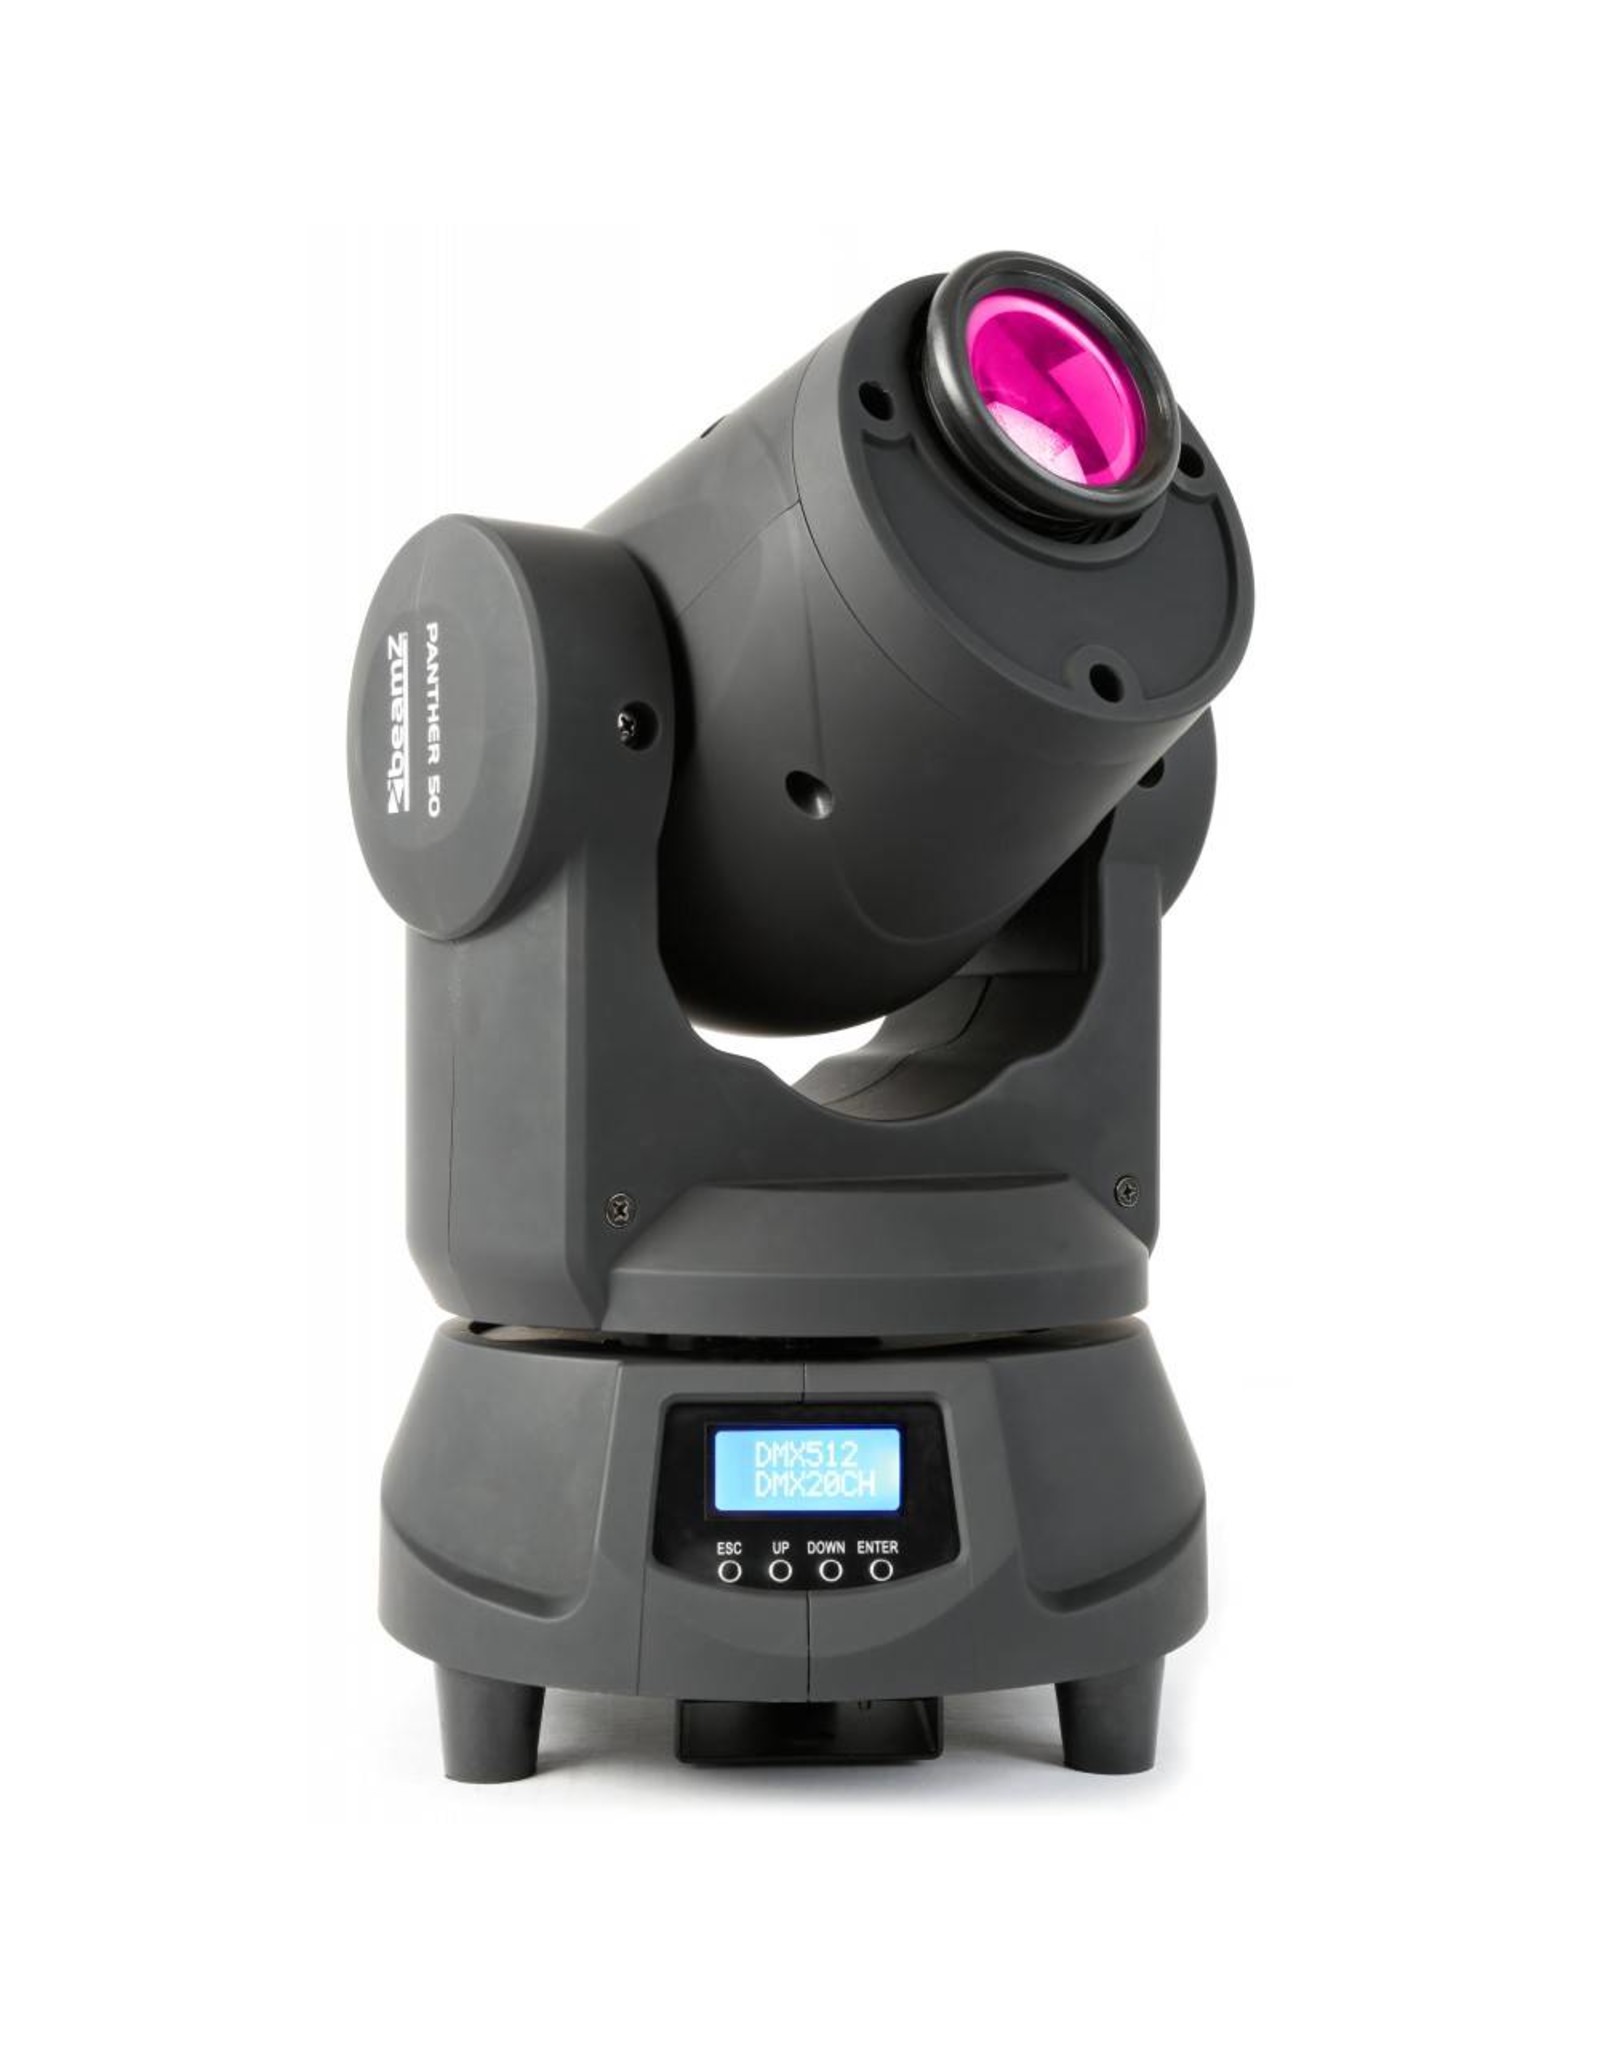 Beamz  Professional Panther 50 LED Spot Moving Head Demo